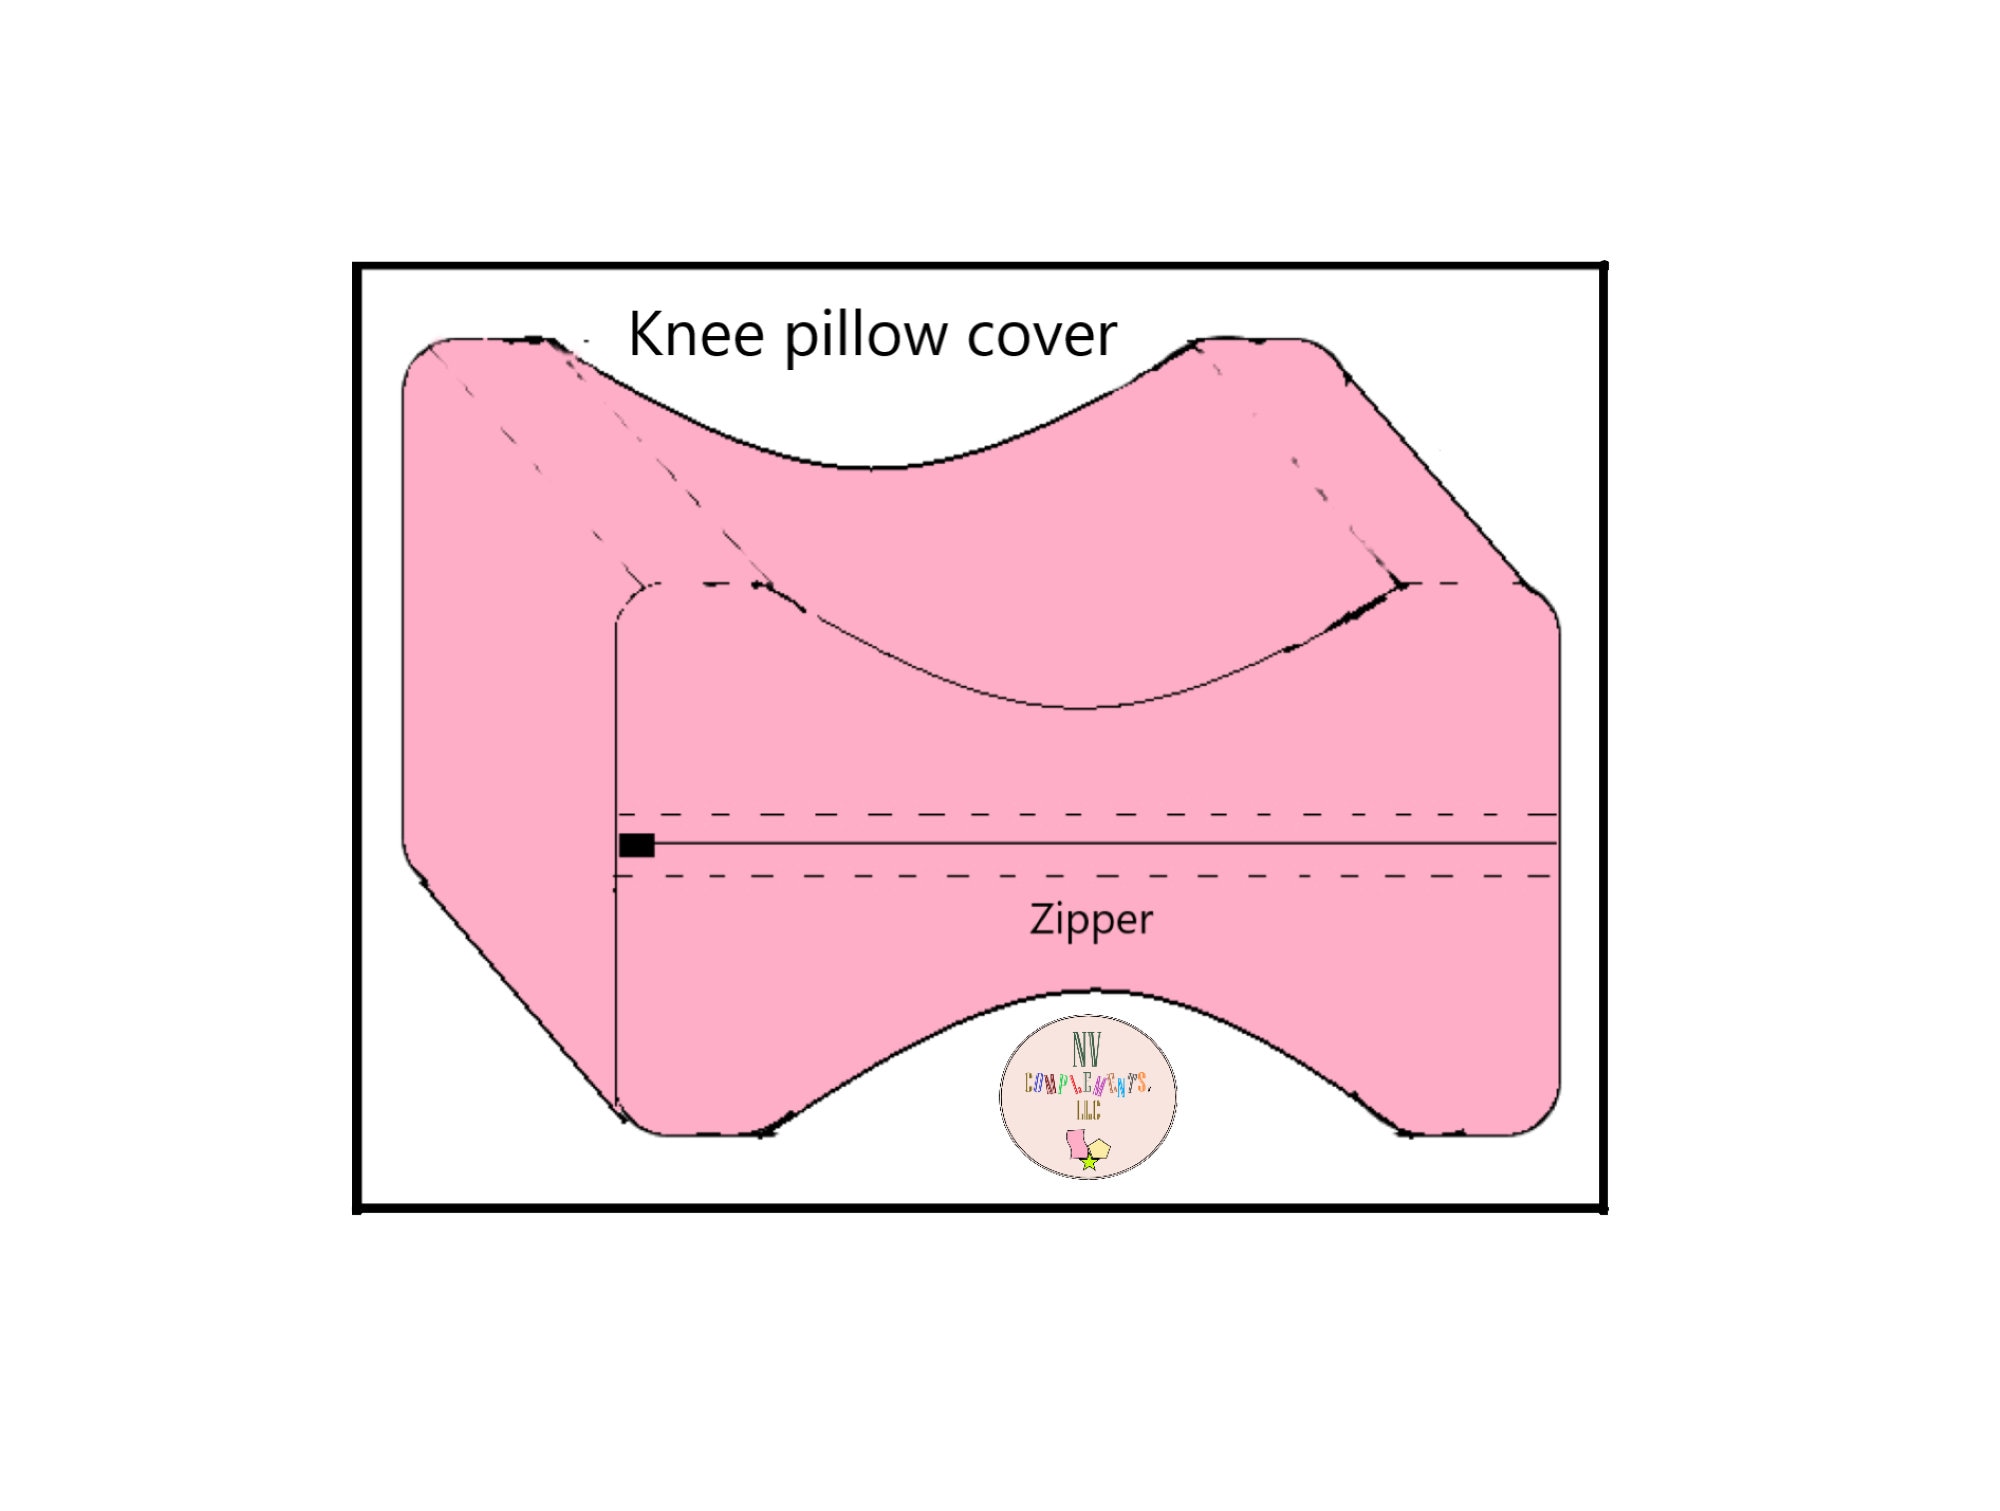 Leg Pillow, Additional Give Away Value $11 Spare Pillowcase, Knee Pillow  for Side Sleepers, Leg Pillows for Sleeping ,Knee Cushion for Sleeping  ,Suitable for Relieving Leg, Back, Knee Pain…($14.99) For AMAZ0N USA